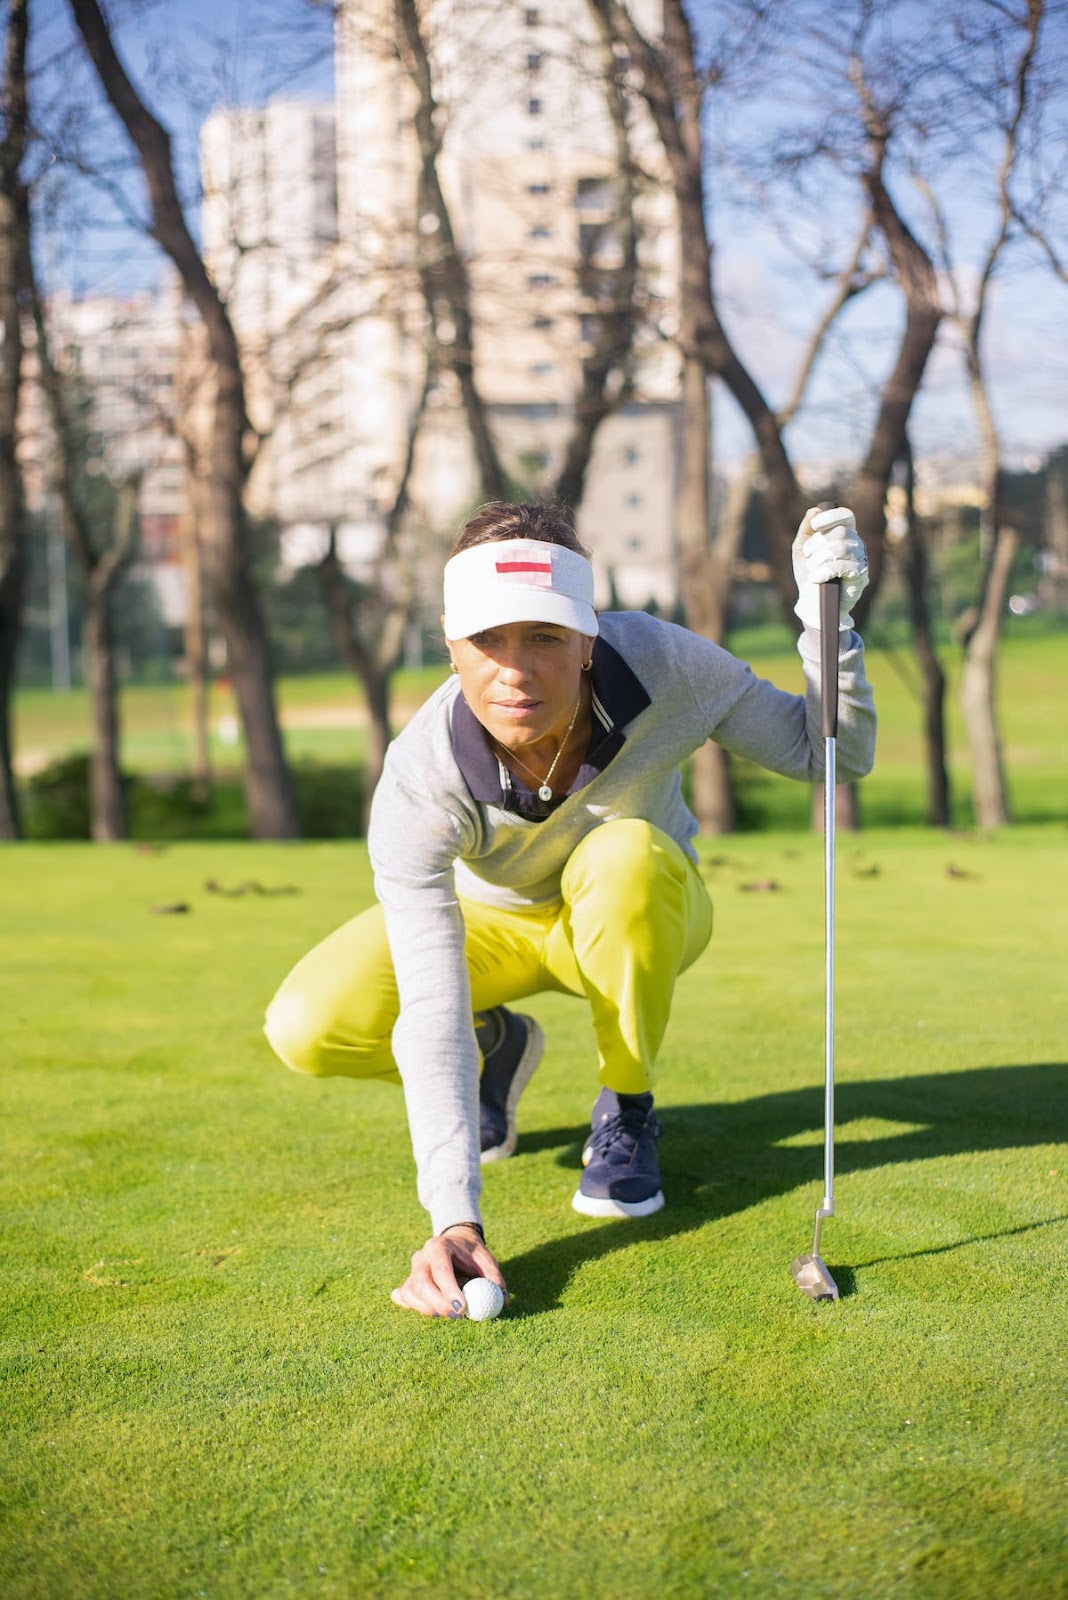 Female golfer looking at her target as she golfs during winter